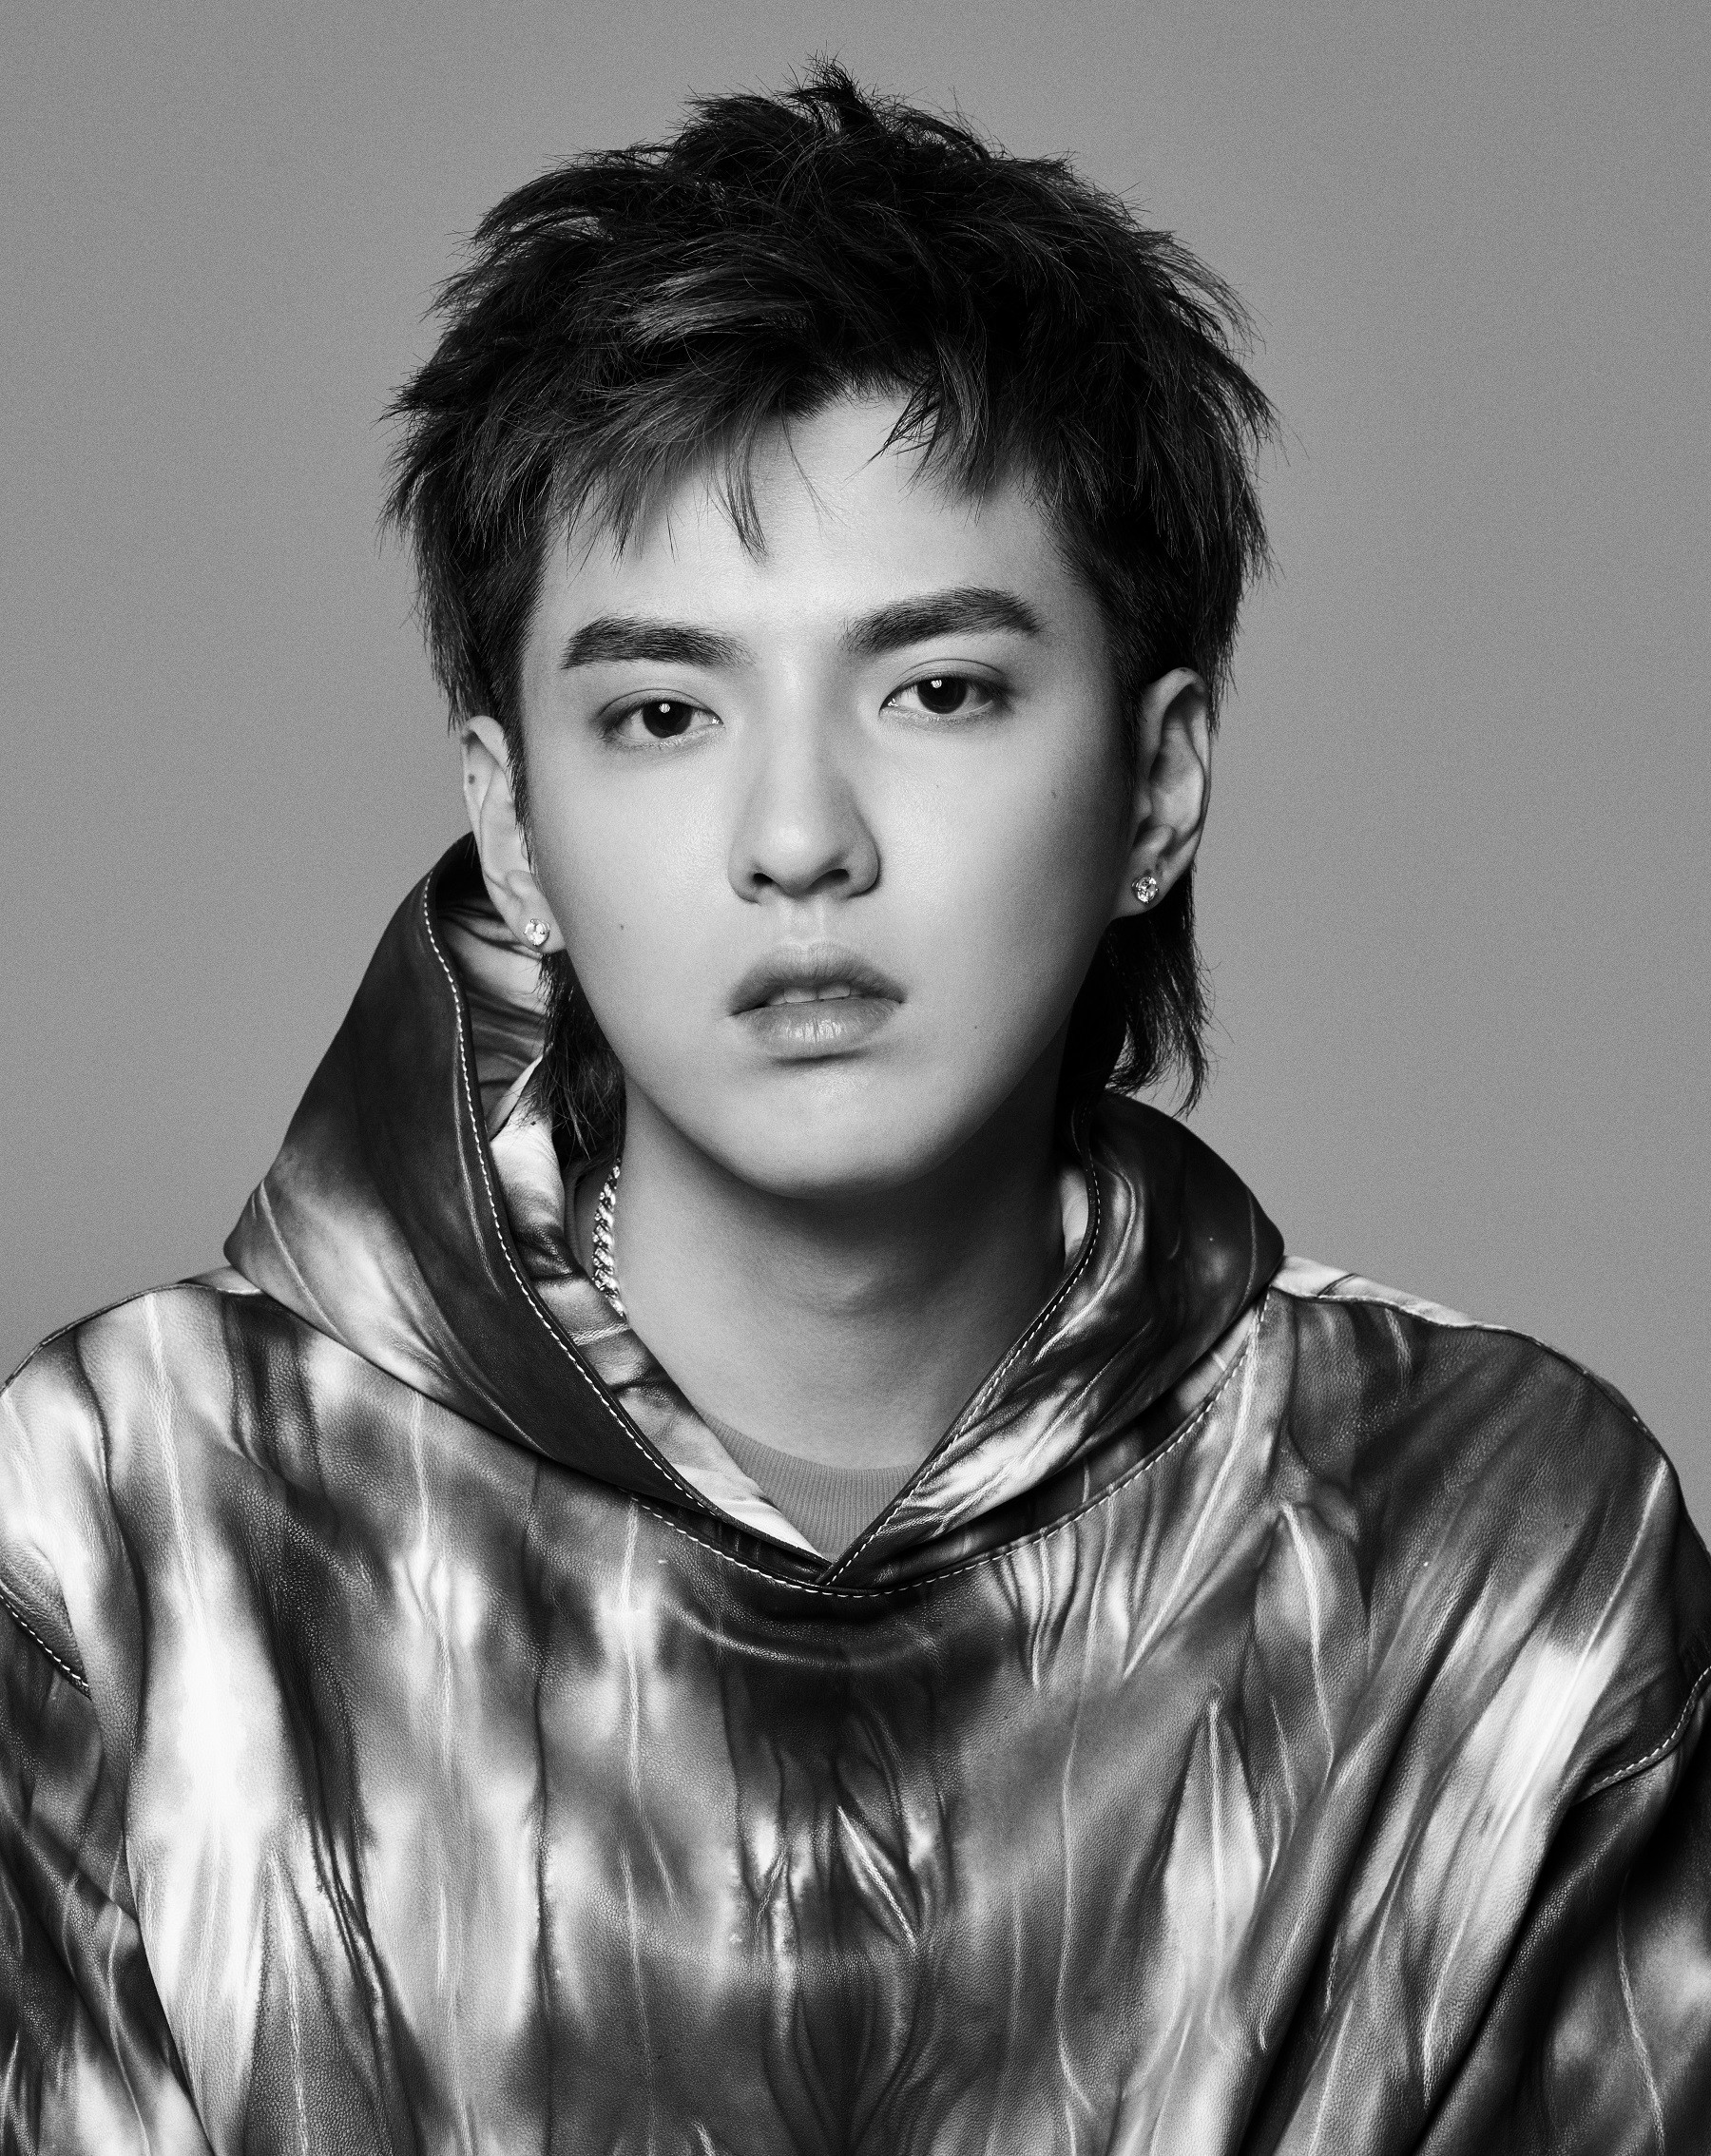 Former EXO member Kris Wu courts controversy after topping US iTunes charts